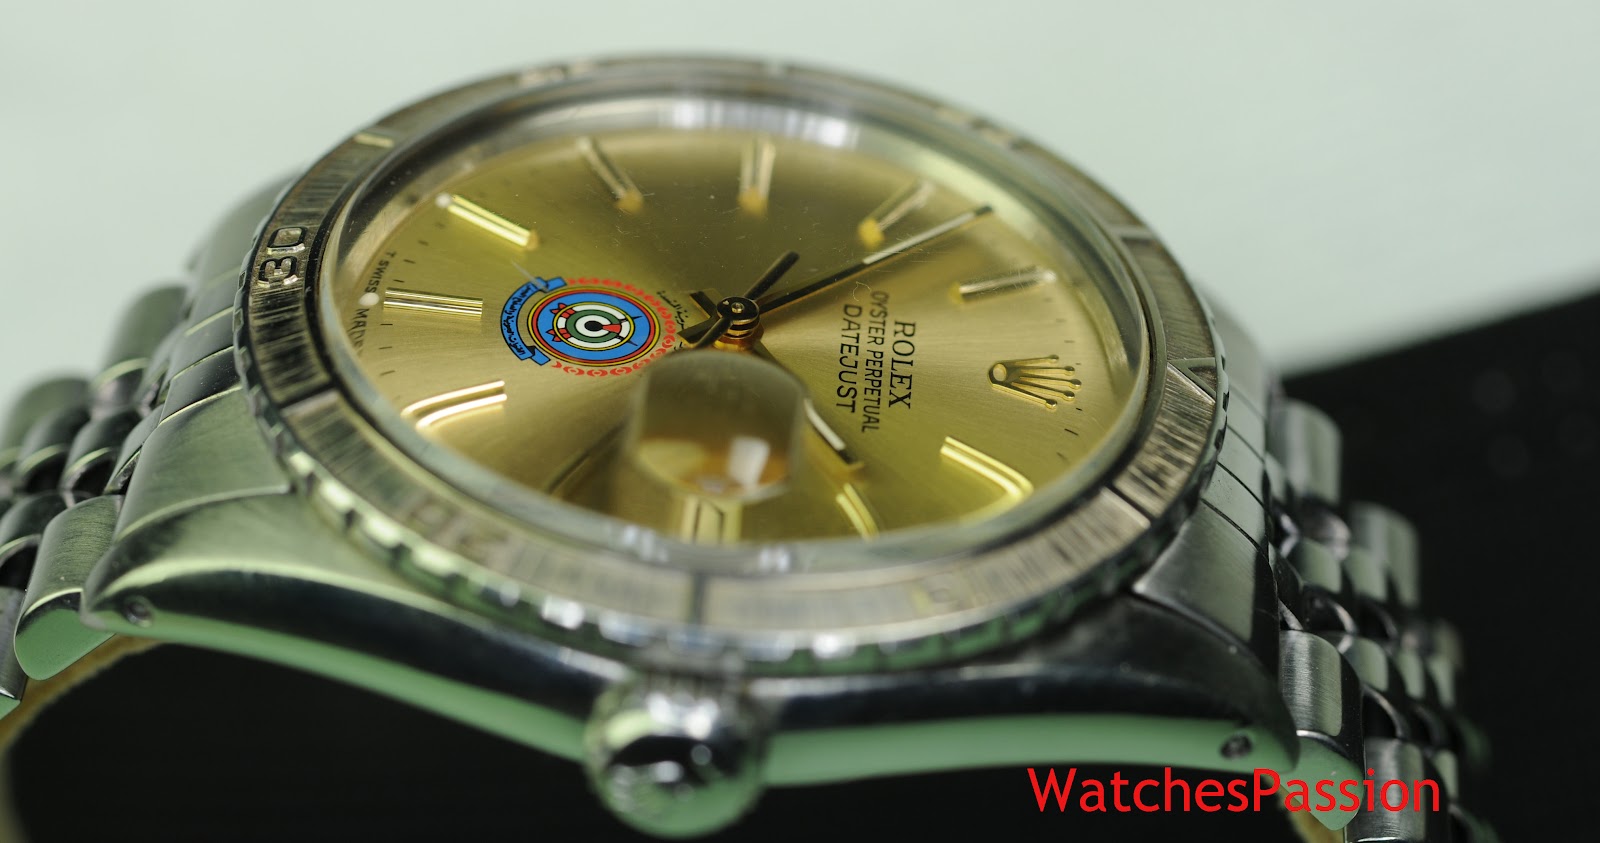 Watches Passion Rolex TurnOGraph UAE Air Force Logo